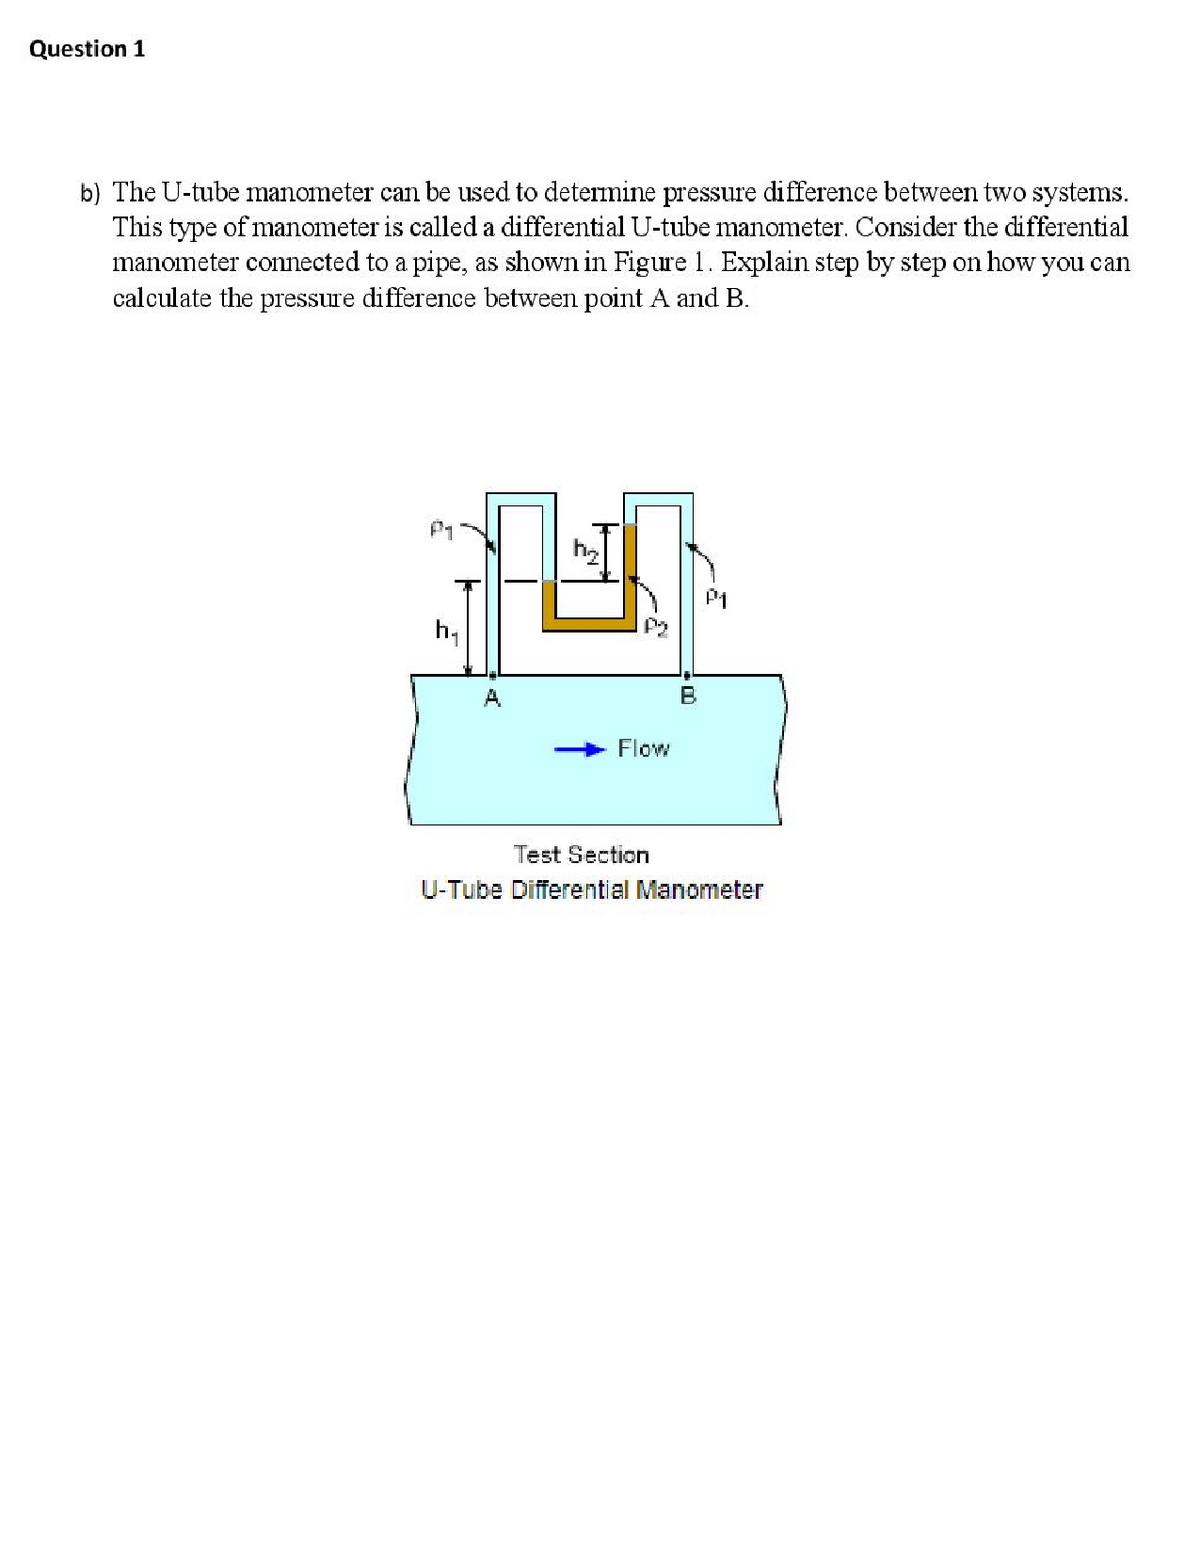 Question 1
b) The U-tube manometer can be used to detemine pressure difference between two systems.
This type of manometer is called a differential U-tube manometer. Consider the differential
manometer connected to a pipe, as shown in Figure 1. Explain step by step on how you can
calculate the pressure difference between point A and B.
P1
h,
A
Flow
Test Section
U-Tube Differential Manometer
